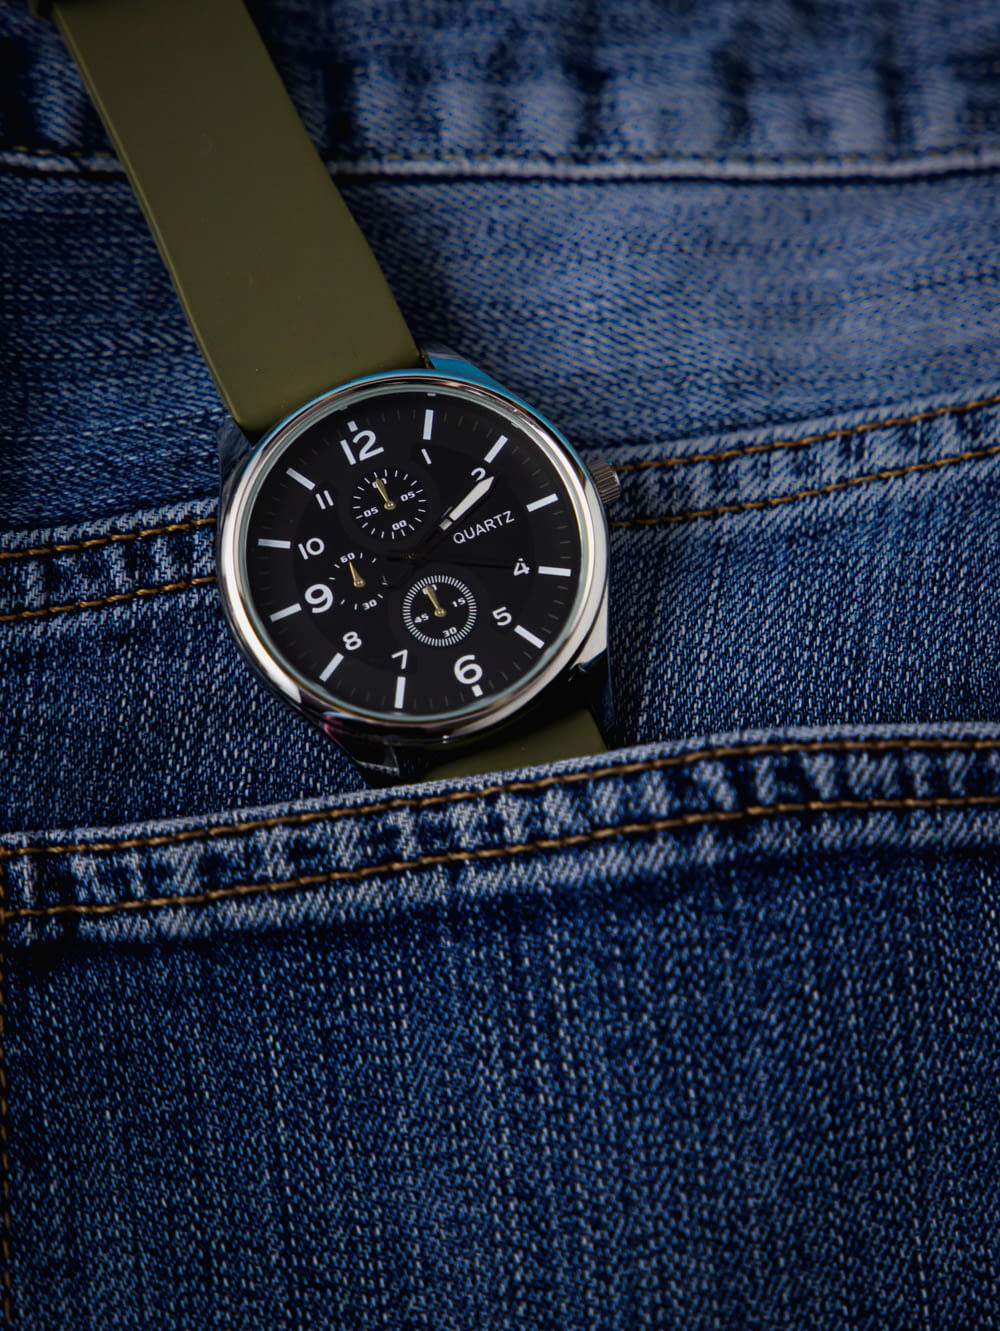 a close up of a watch in the pocket of a pair of jeans